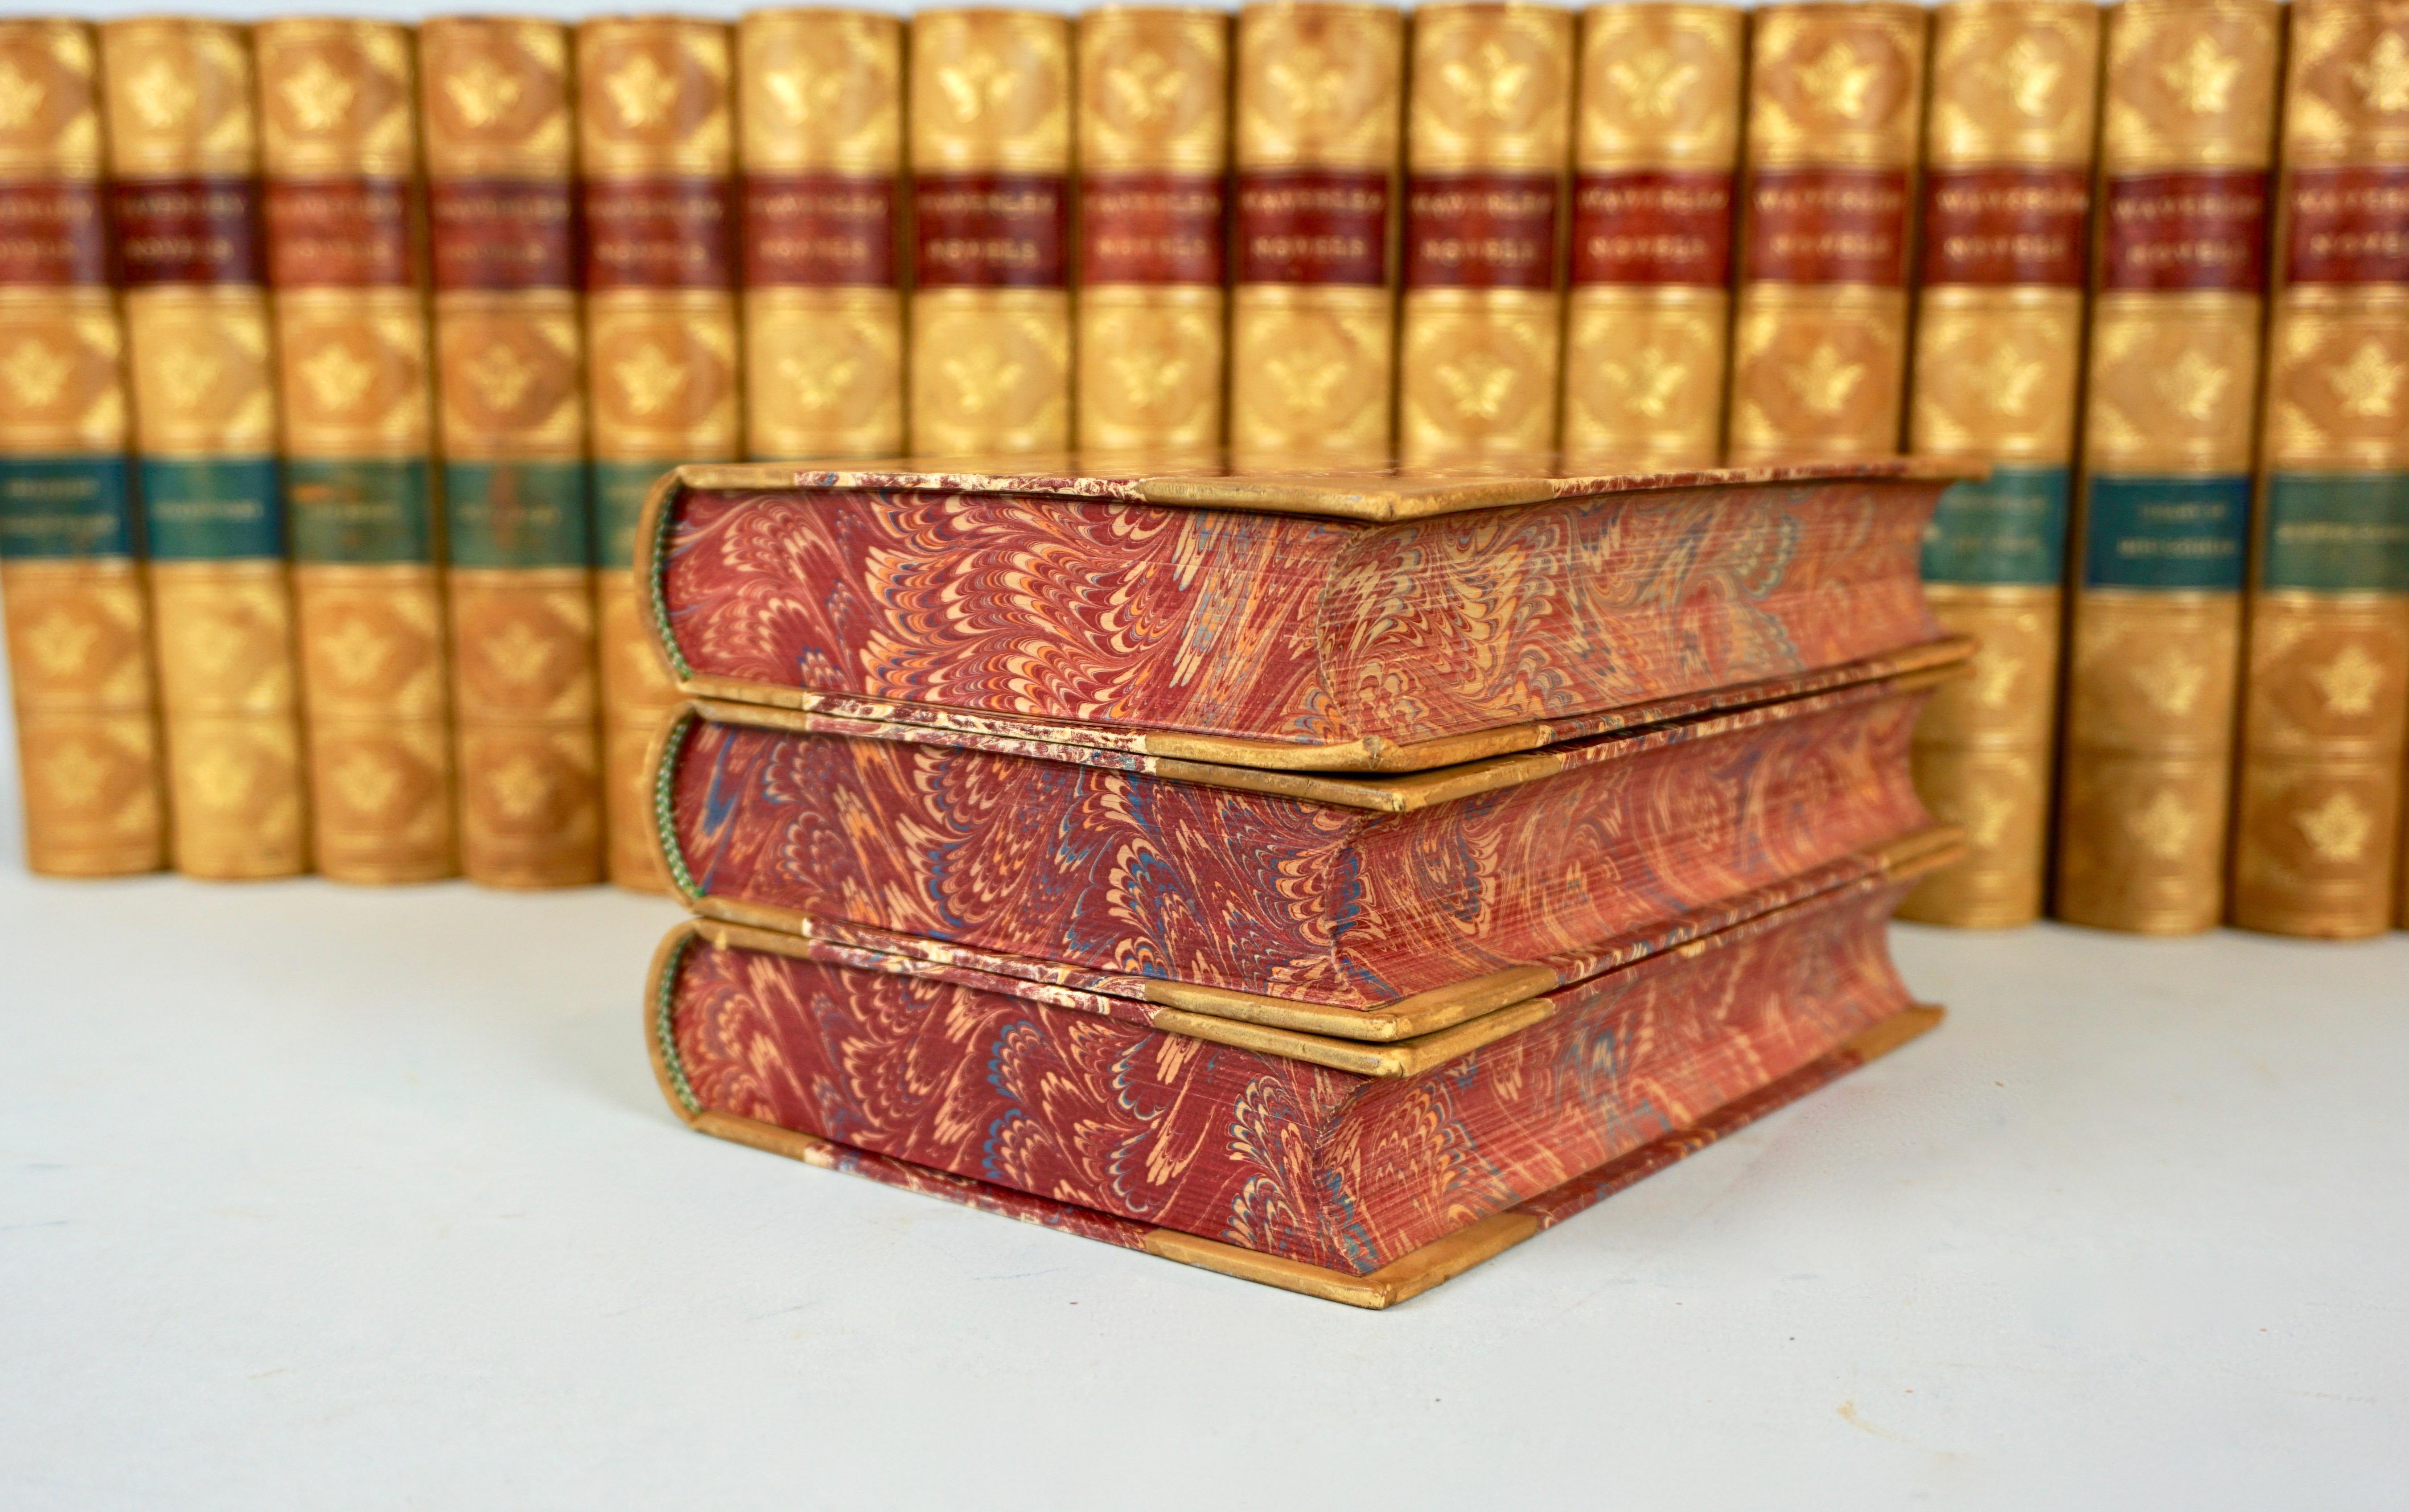 Waverly Novels 'The Works of Sir Walter Scott' in 25 Volumes Bound in Leather 2